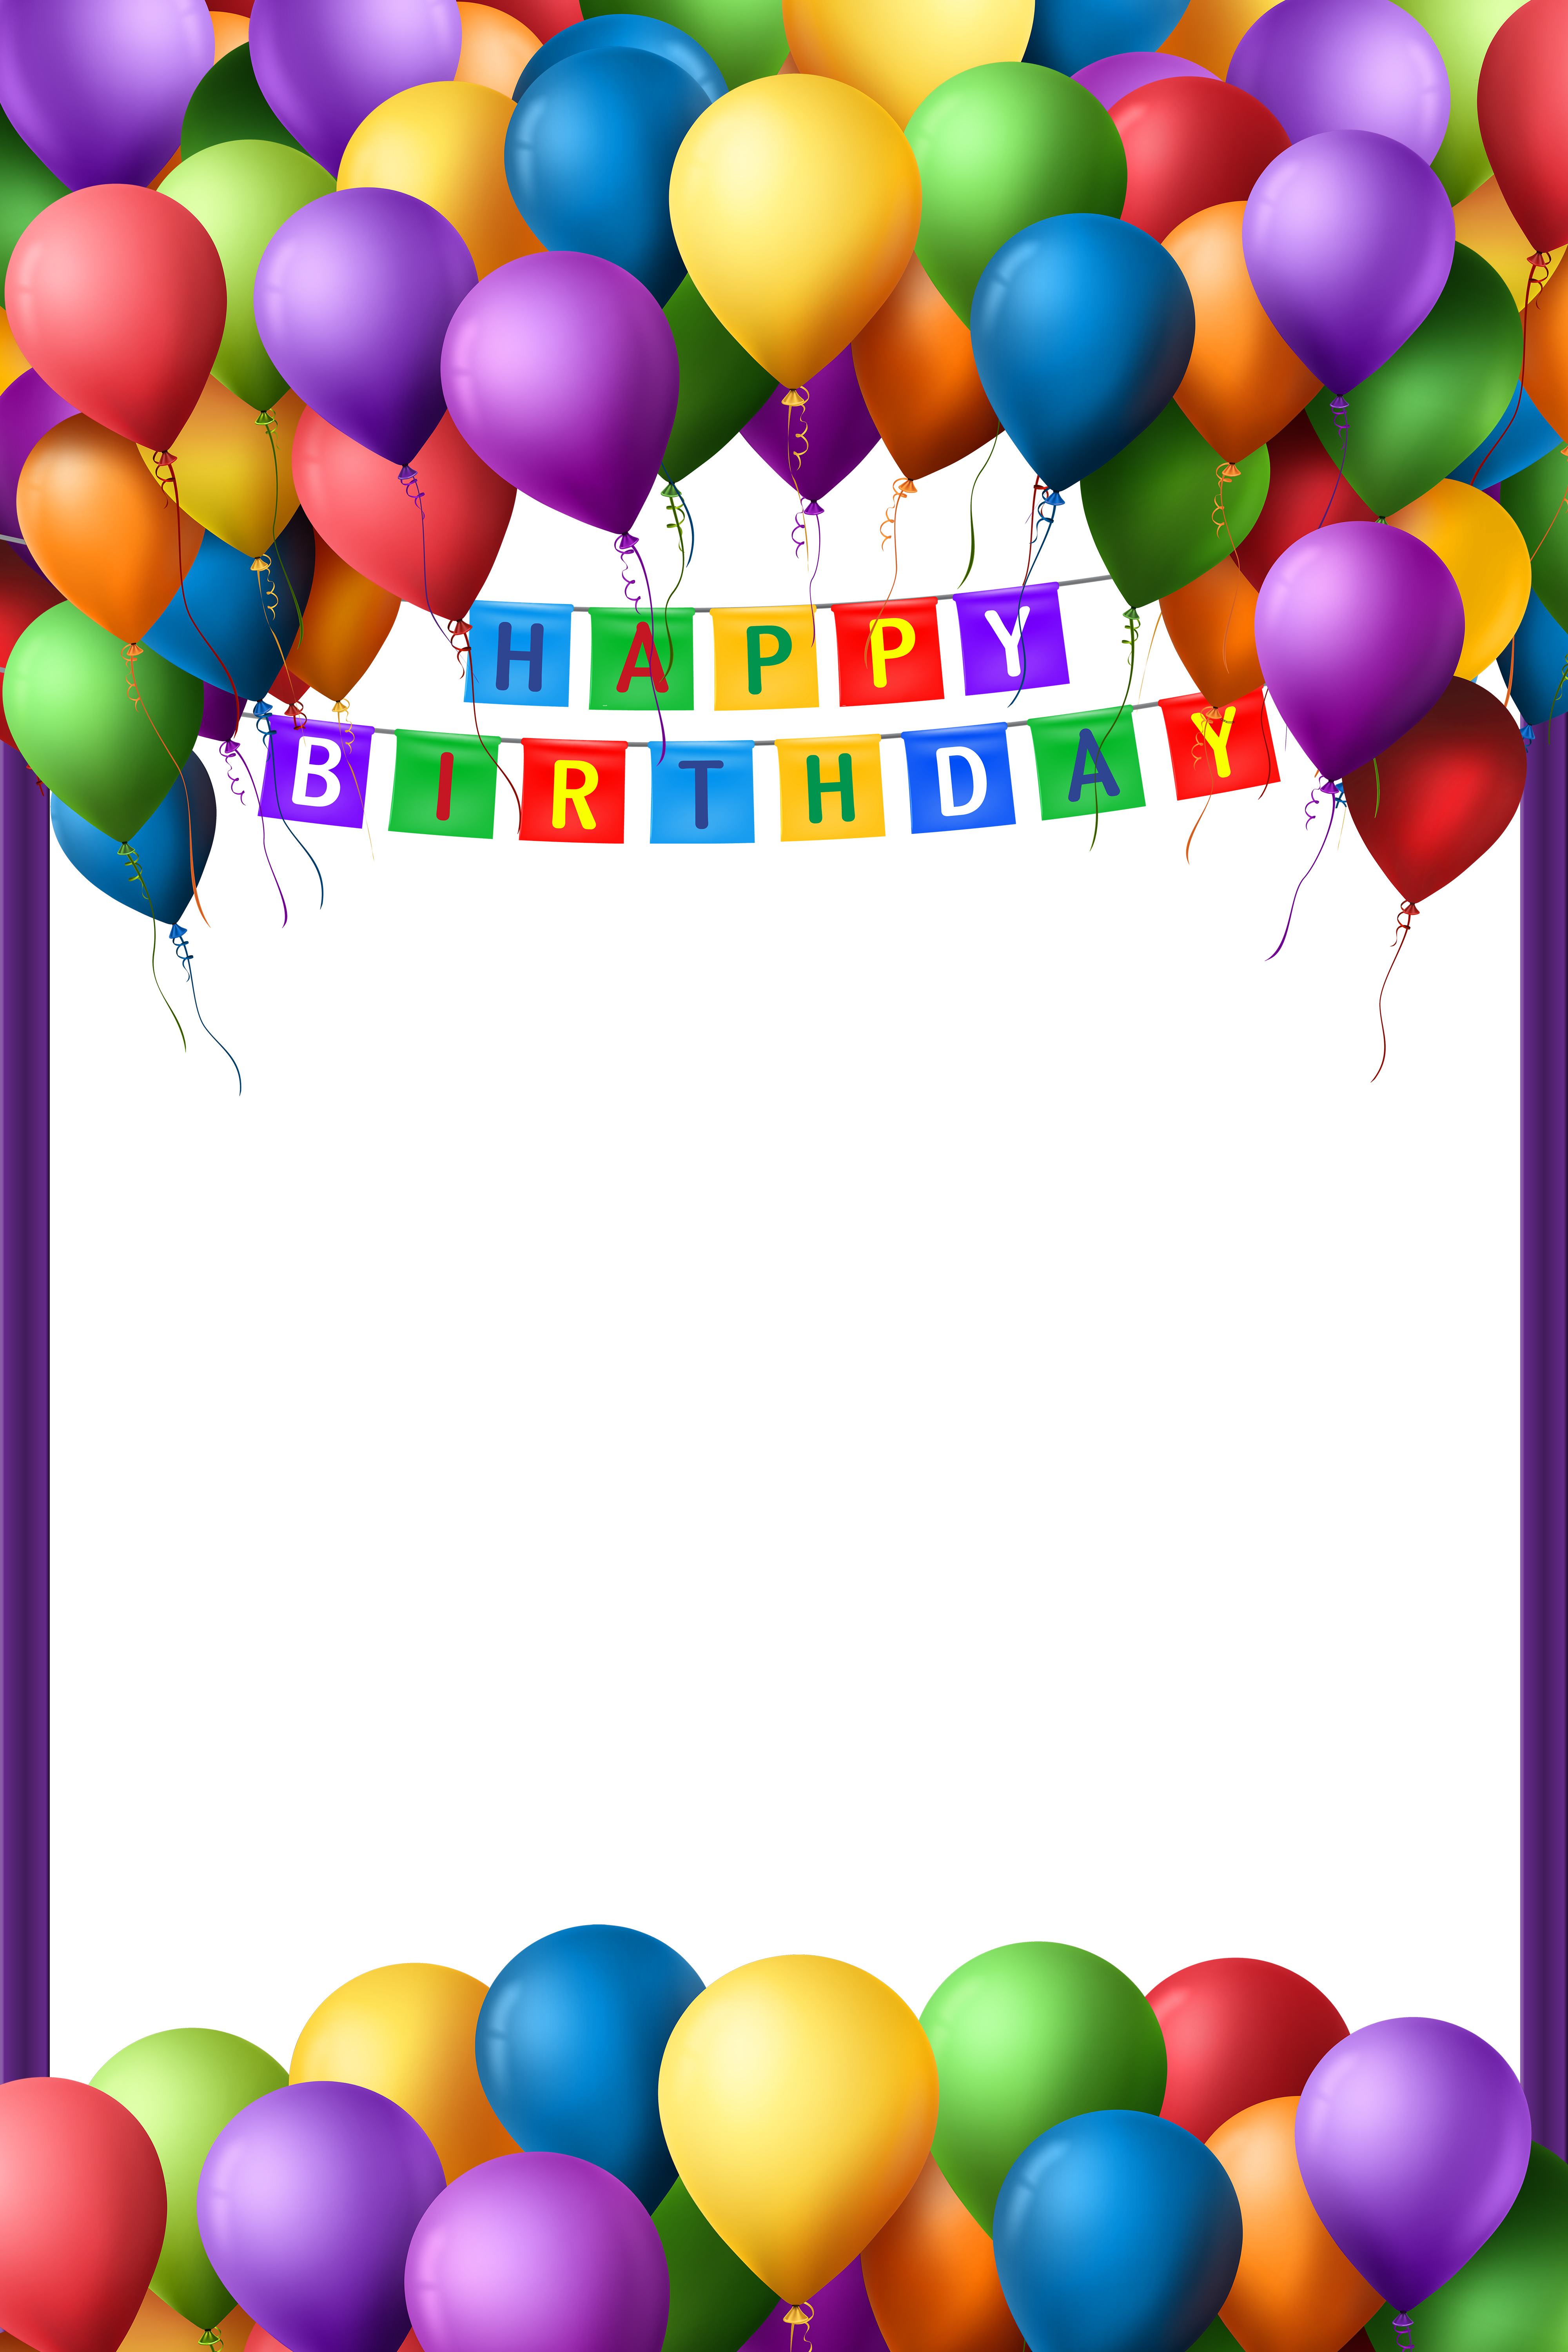 Happy birthday frame png. Transparent gallery yopriceville high